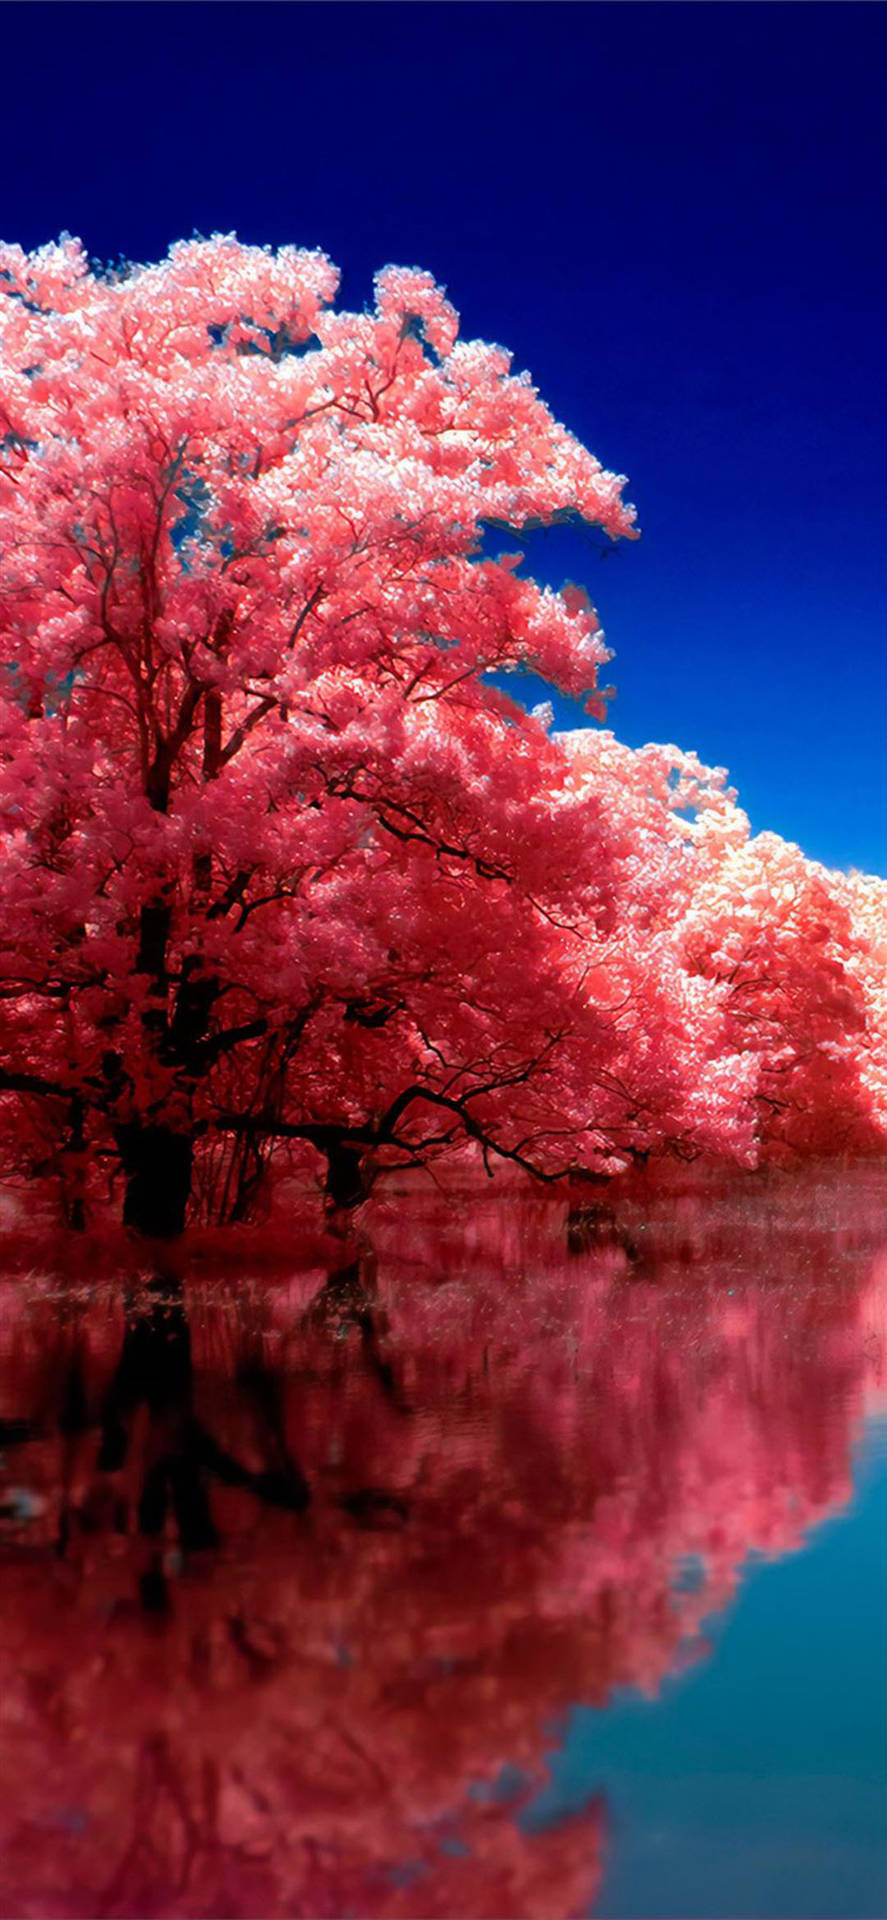 Autumn Iphone Pink Cherry Blossoms Reflection Wallpaper